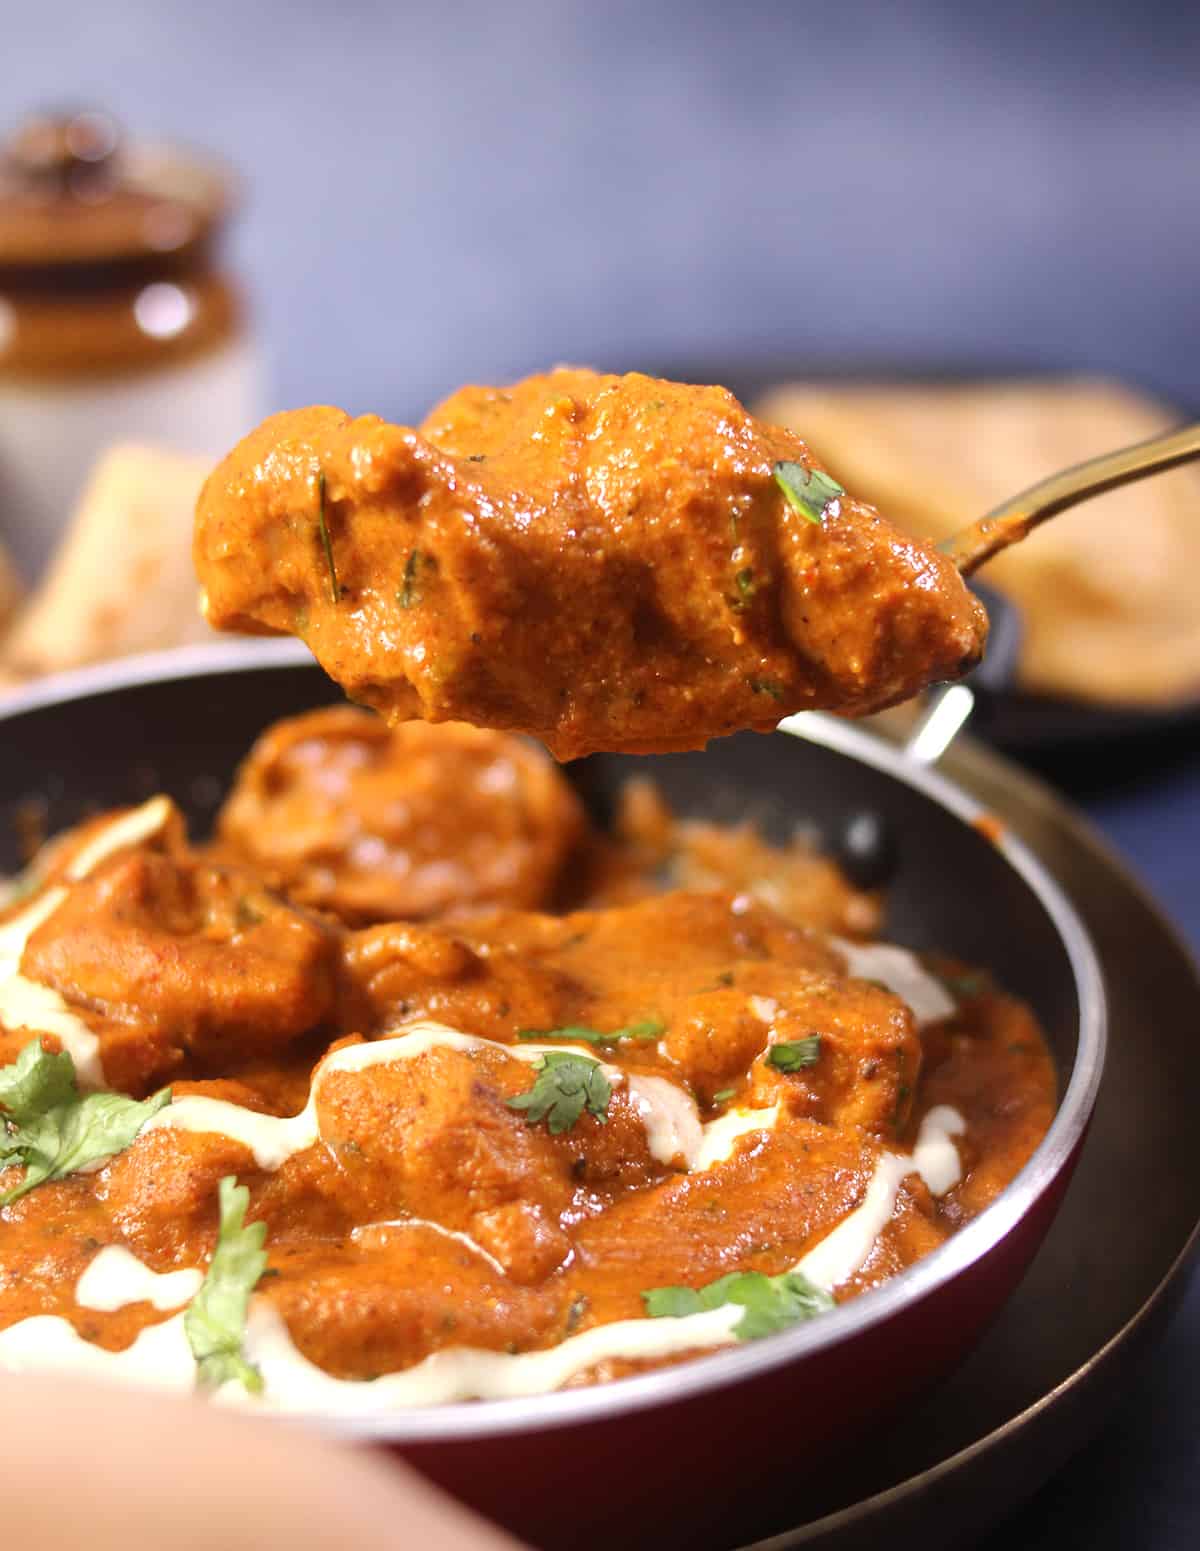 spoonful of the best creamy and authentic butter chicken curry or makhani sauce.